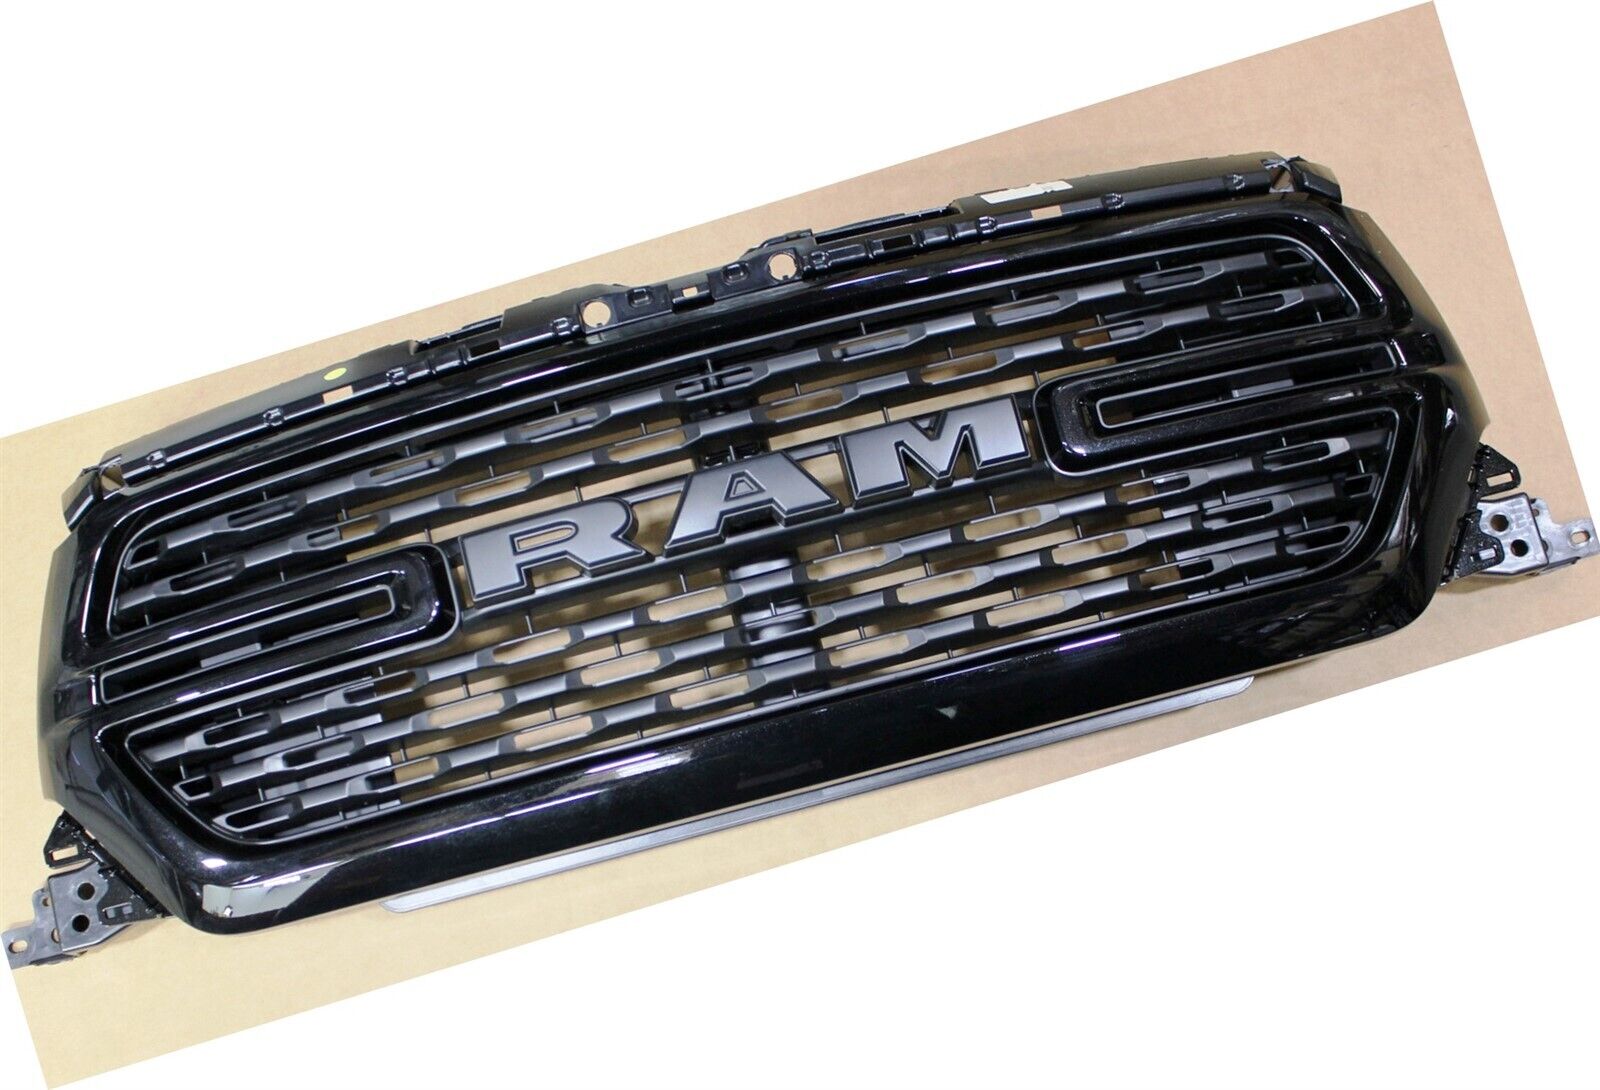 OEM Factory RAM 1500 Grille BLACK CRYSTAL PEARL Front BIG HORN Grill OE Dodge